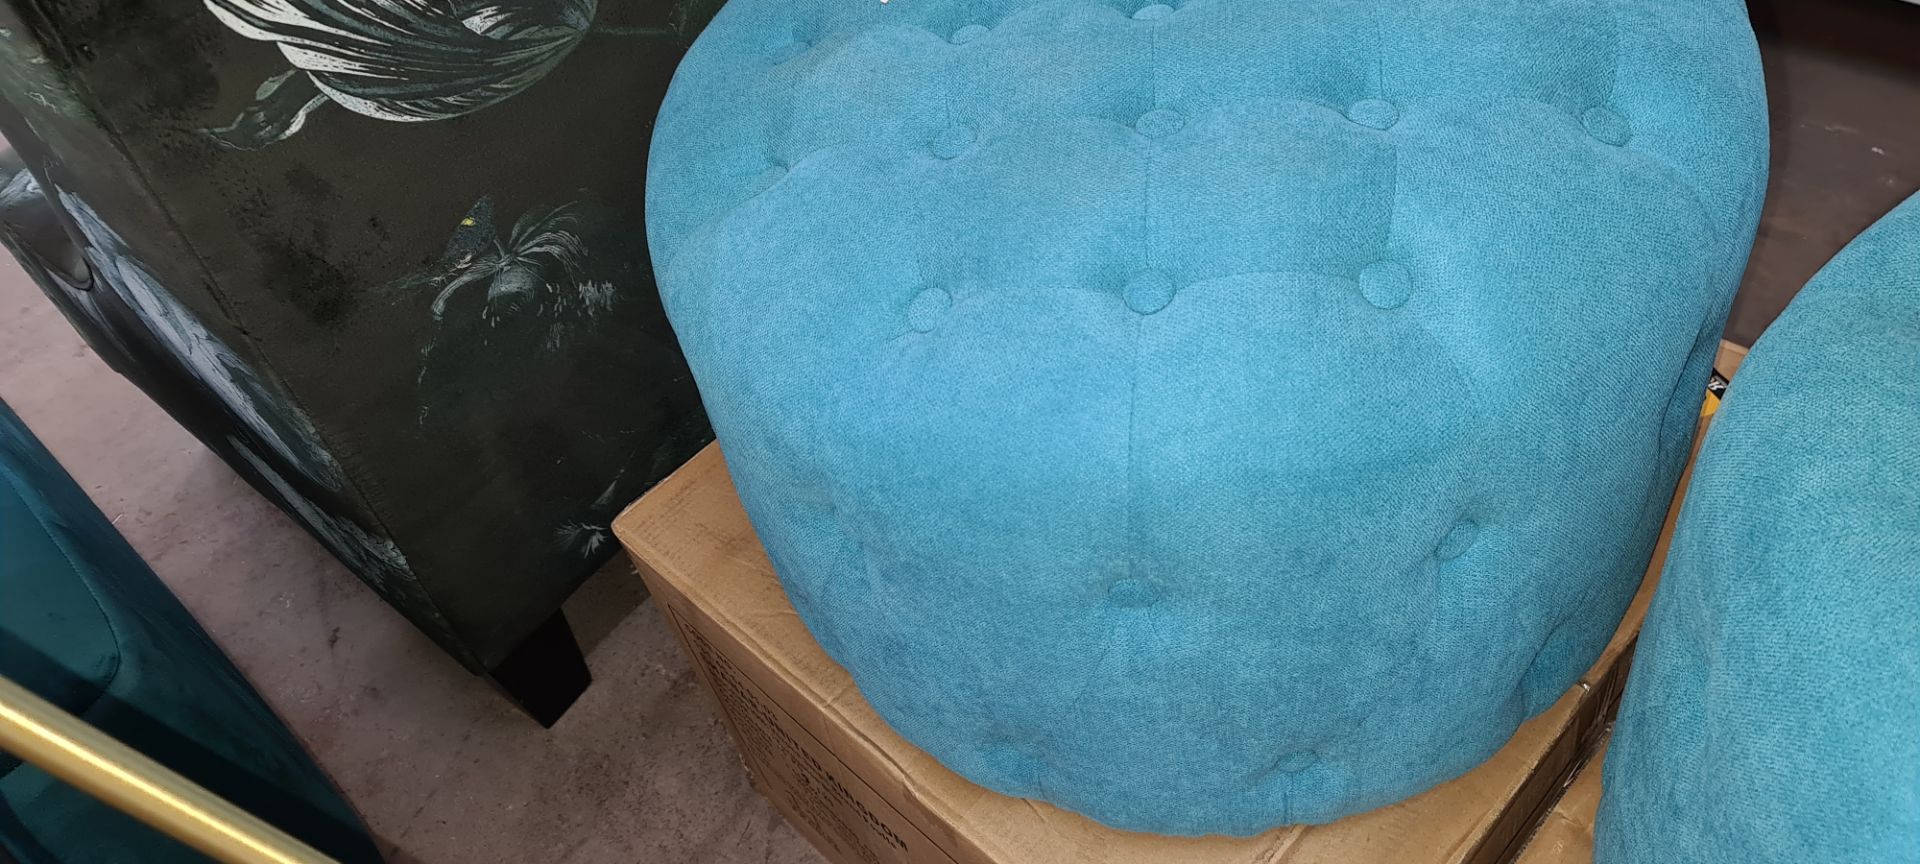 Pair of Verona turquoise blue round pouffe, priced at £64.99 each - Image 4 of 5